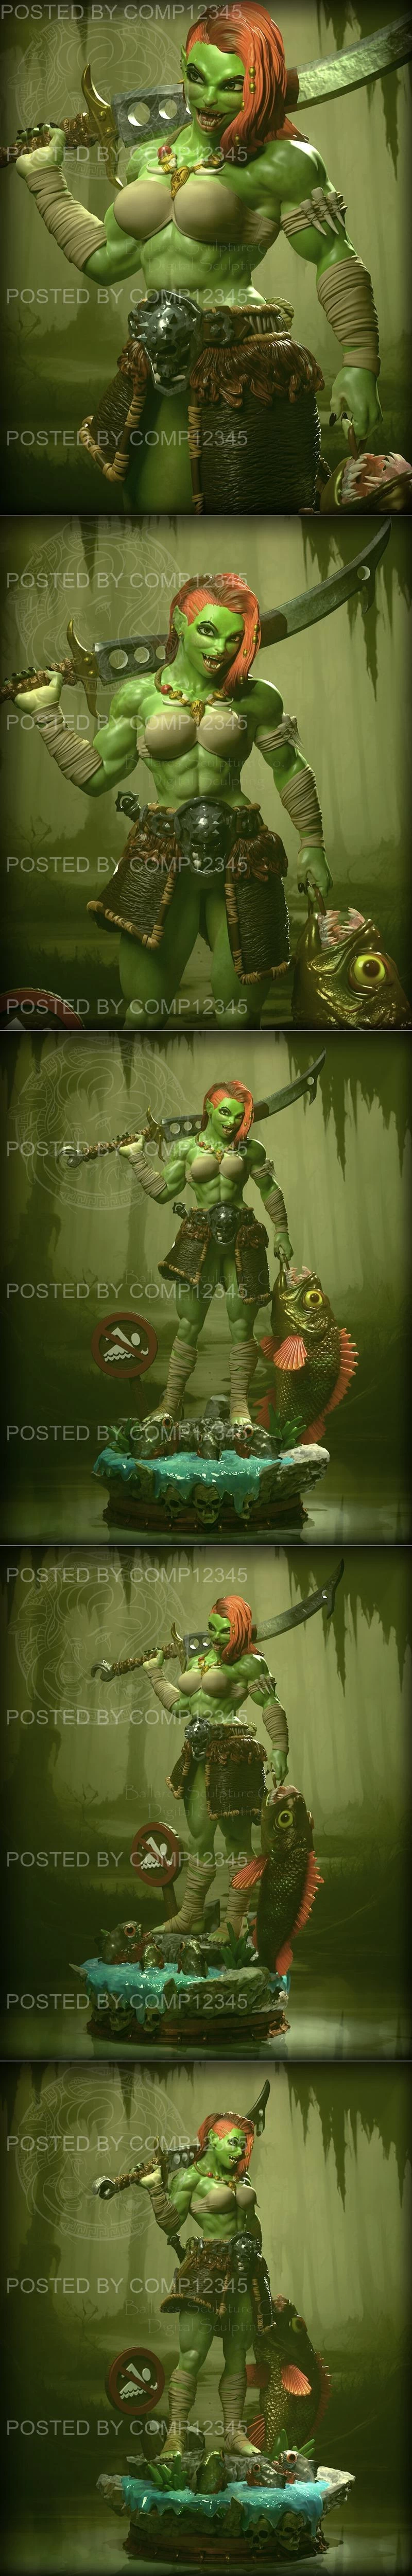 Orc Girl By Creative Geek MB